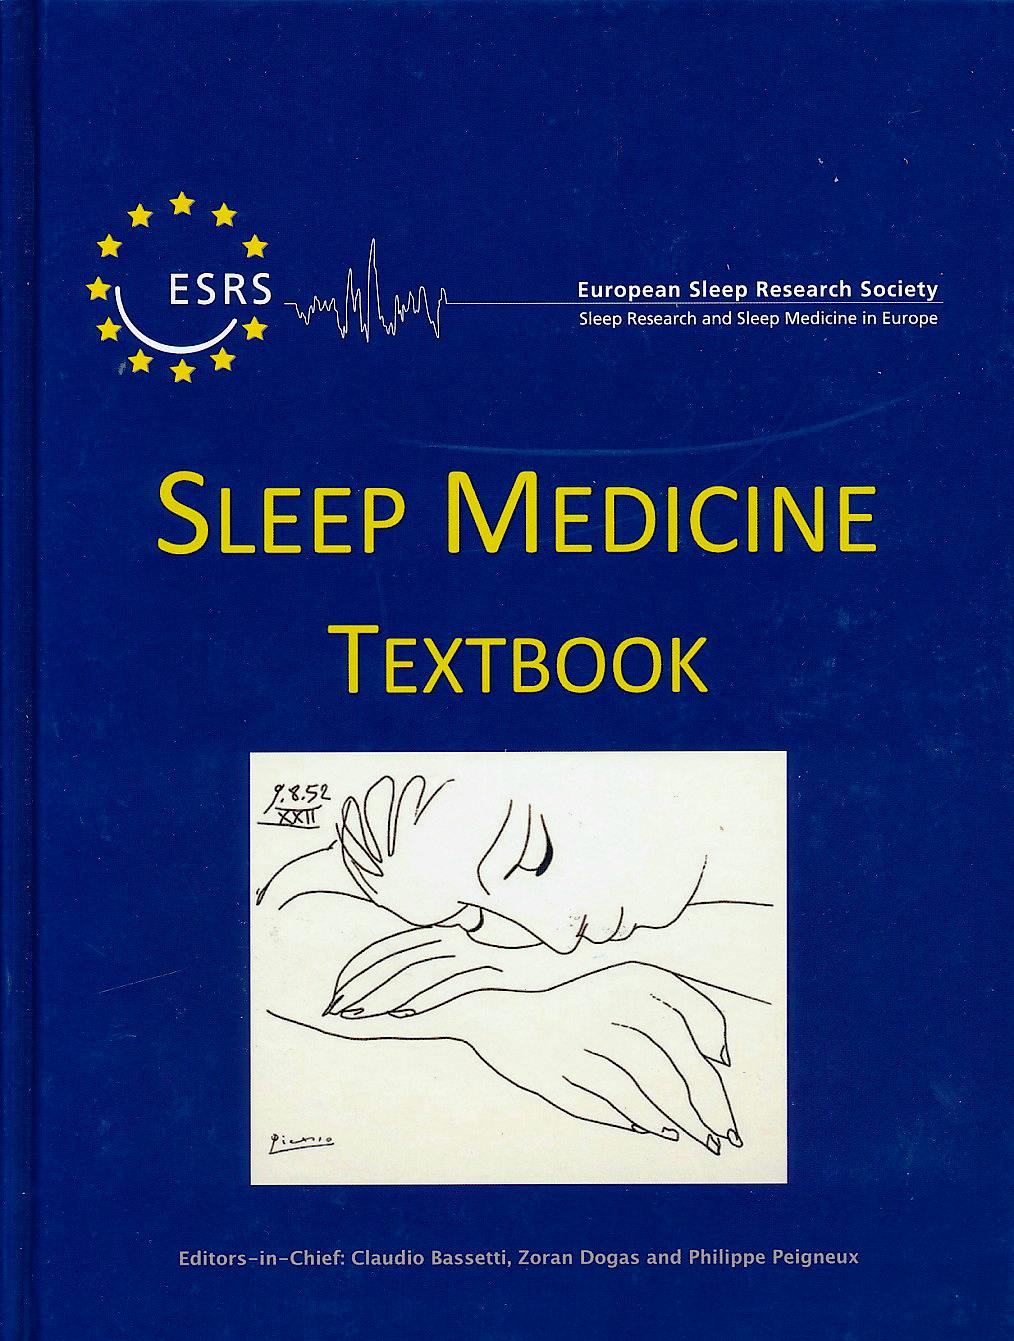 journal of sleep research manuscript submission